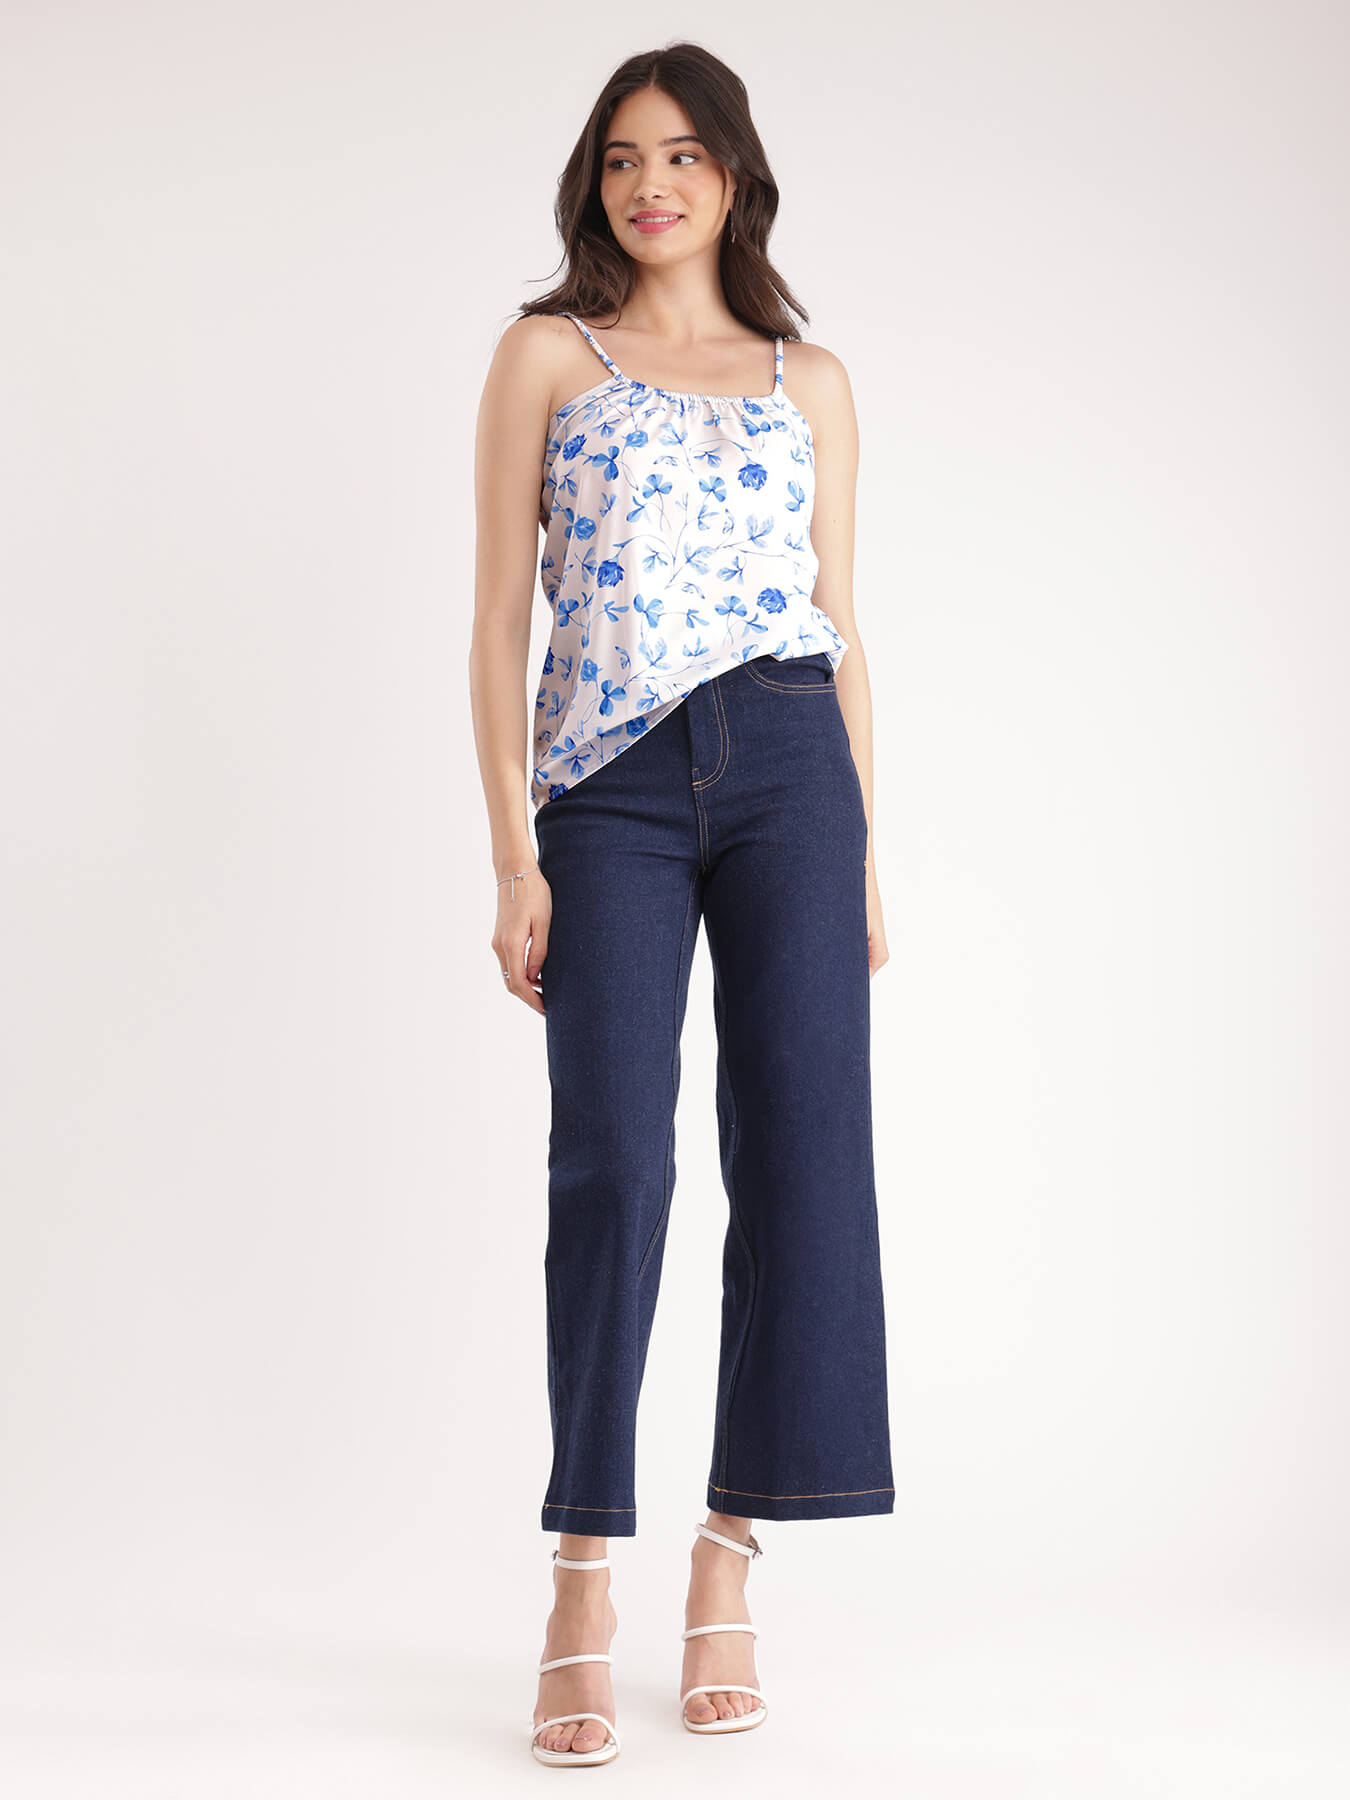 Floral Cami Top - Blue And White